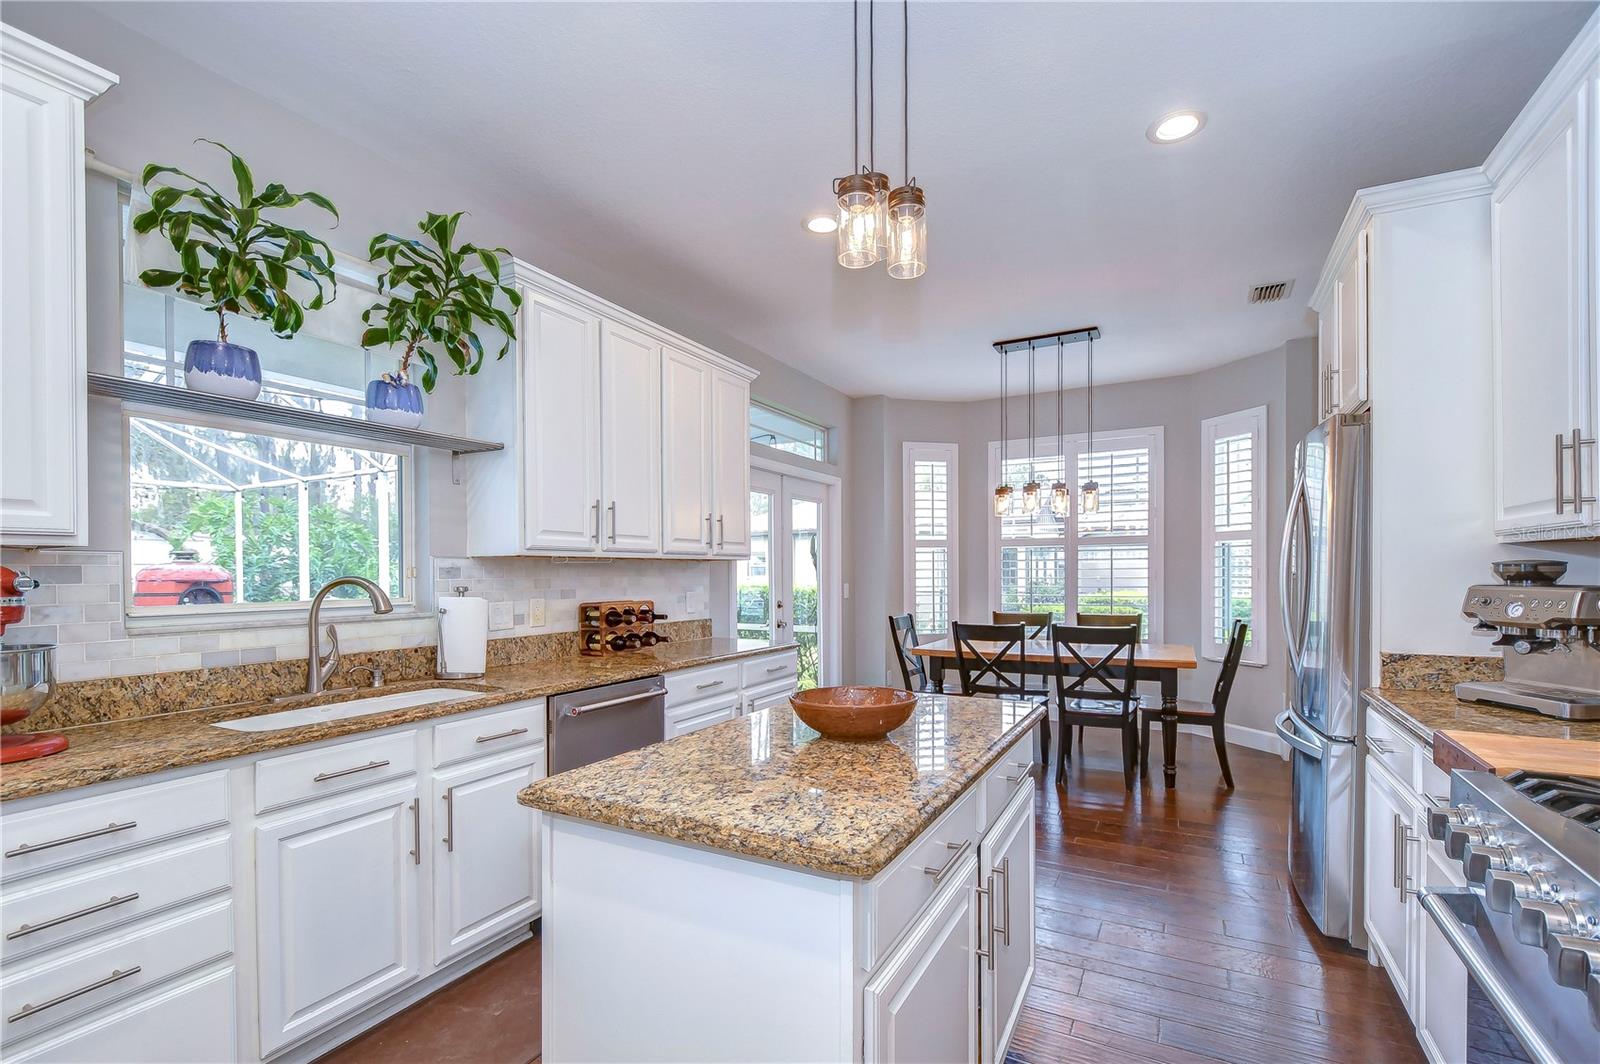 42” white cabinets, granite countertops and a walk-in pantry!